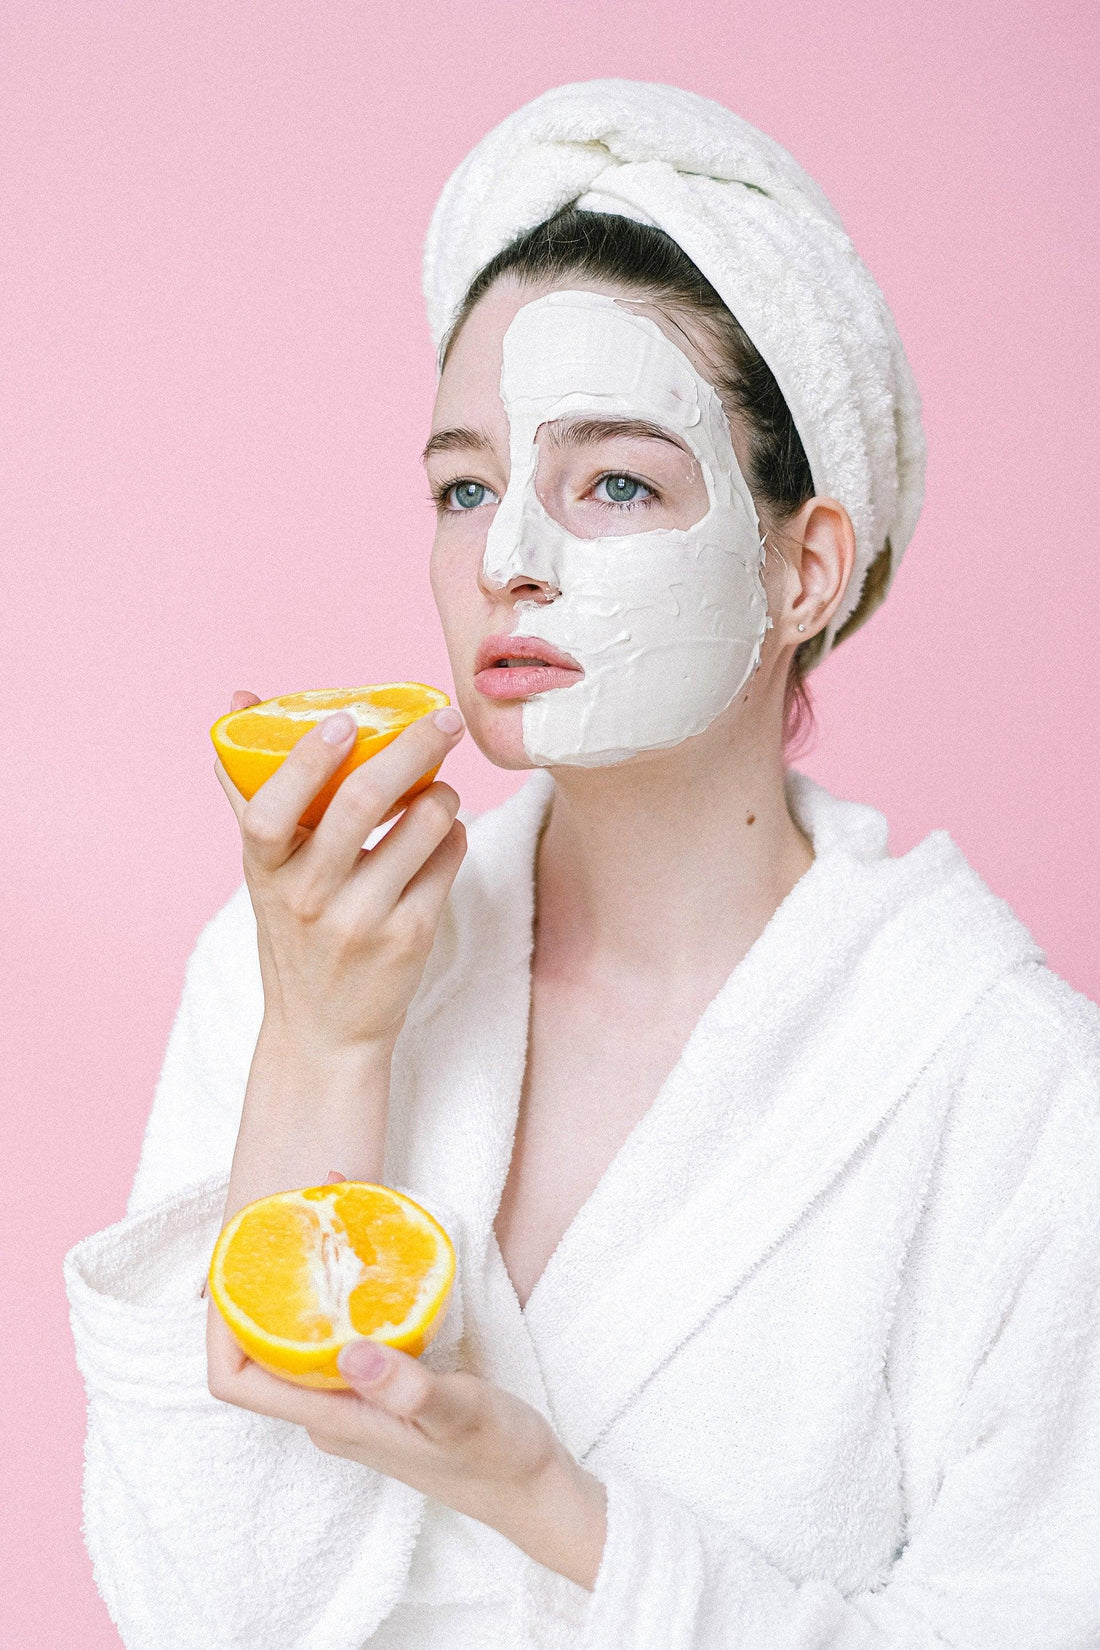 All You Need To Know About Natural Skincare - enviablebeauty.com